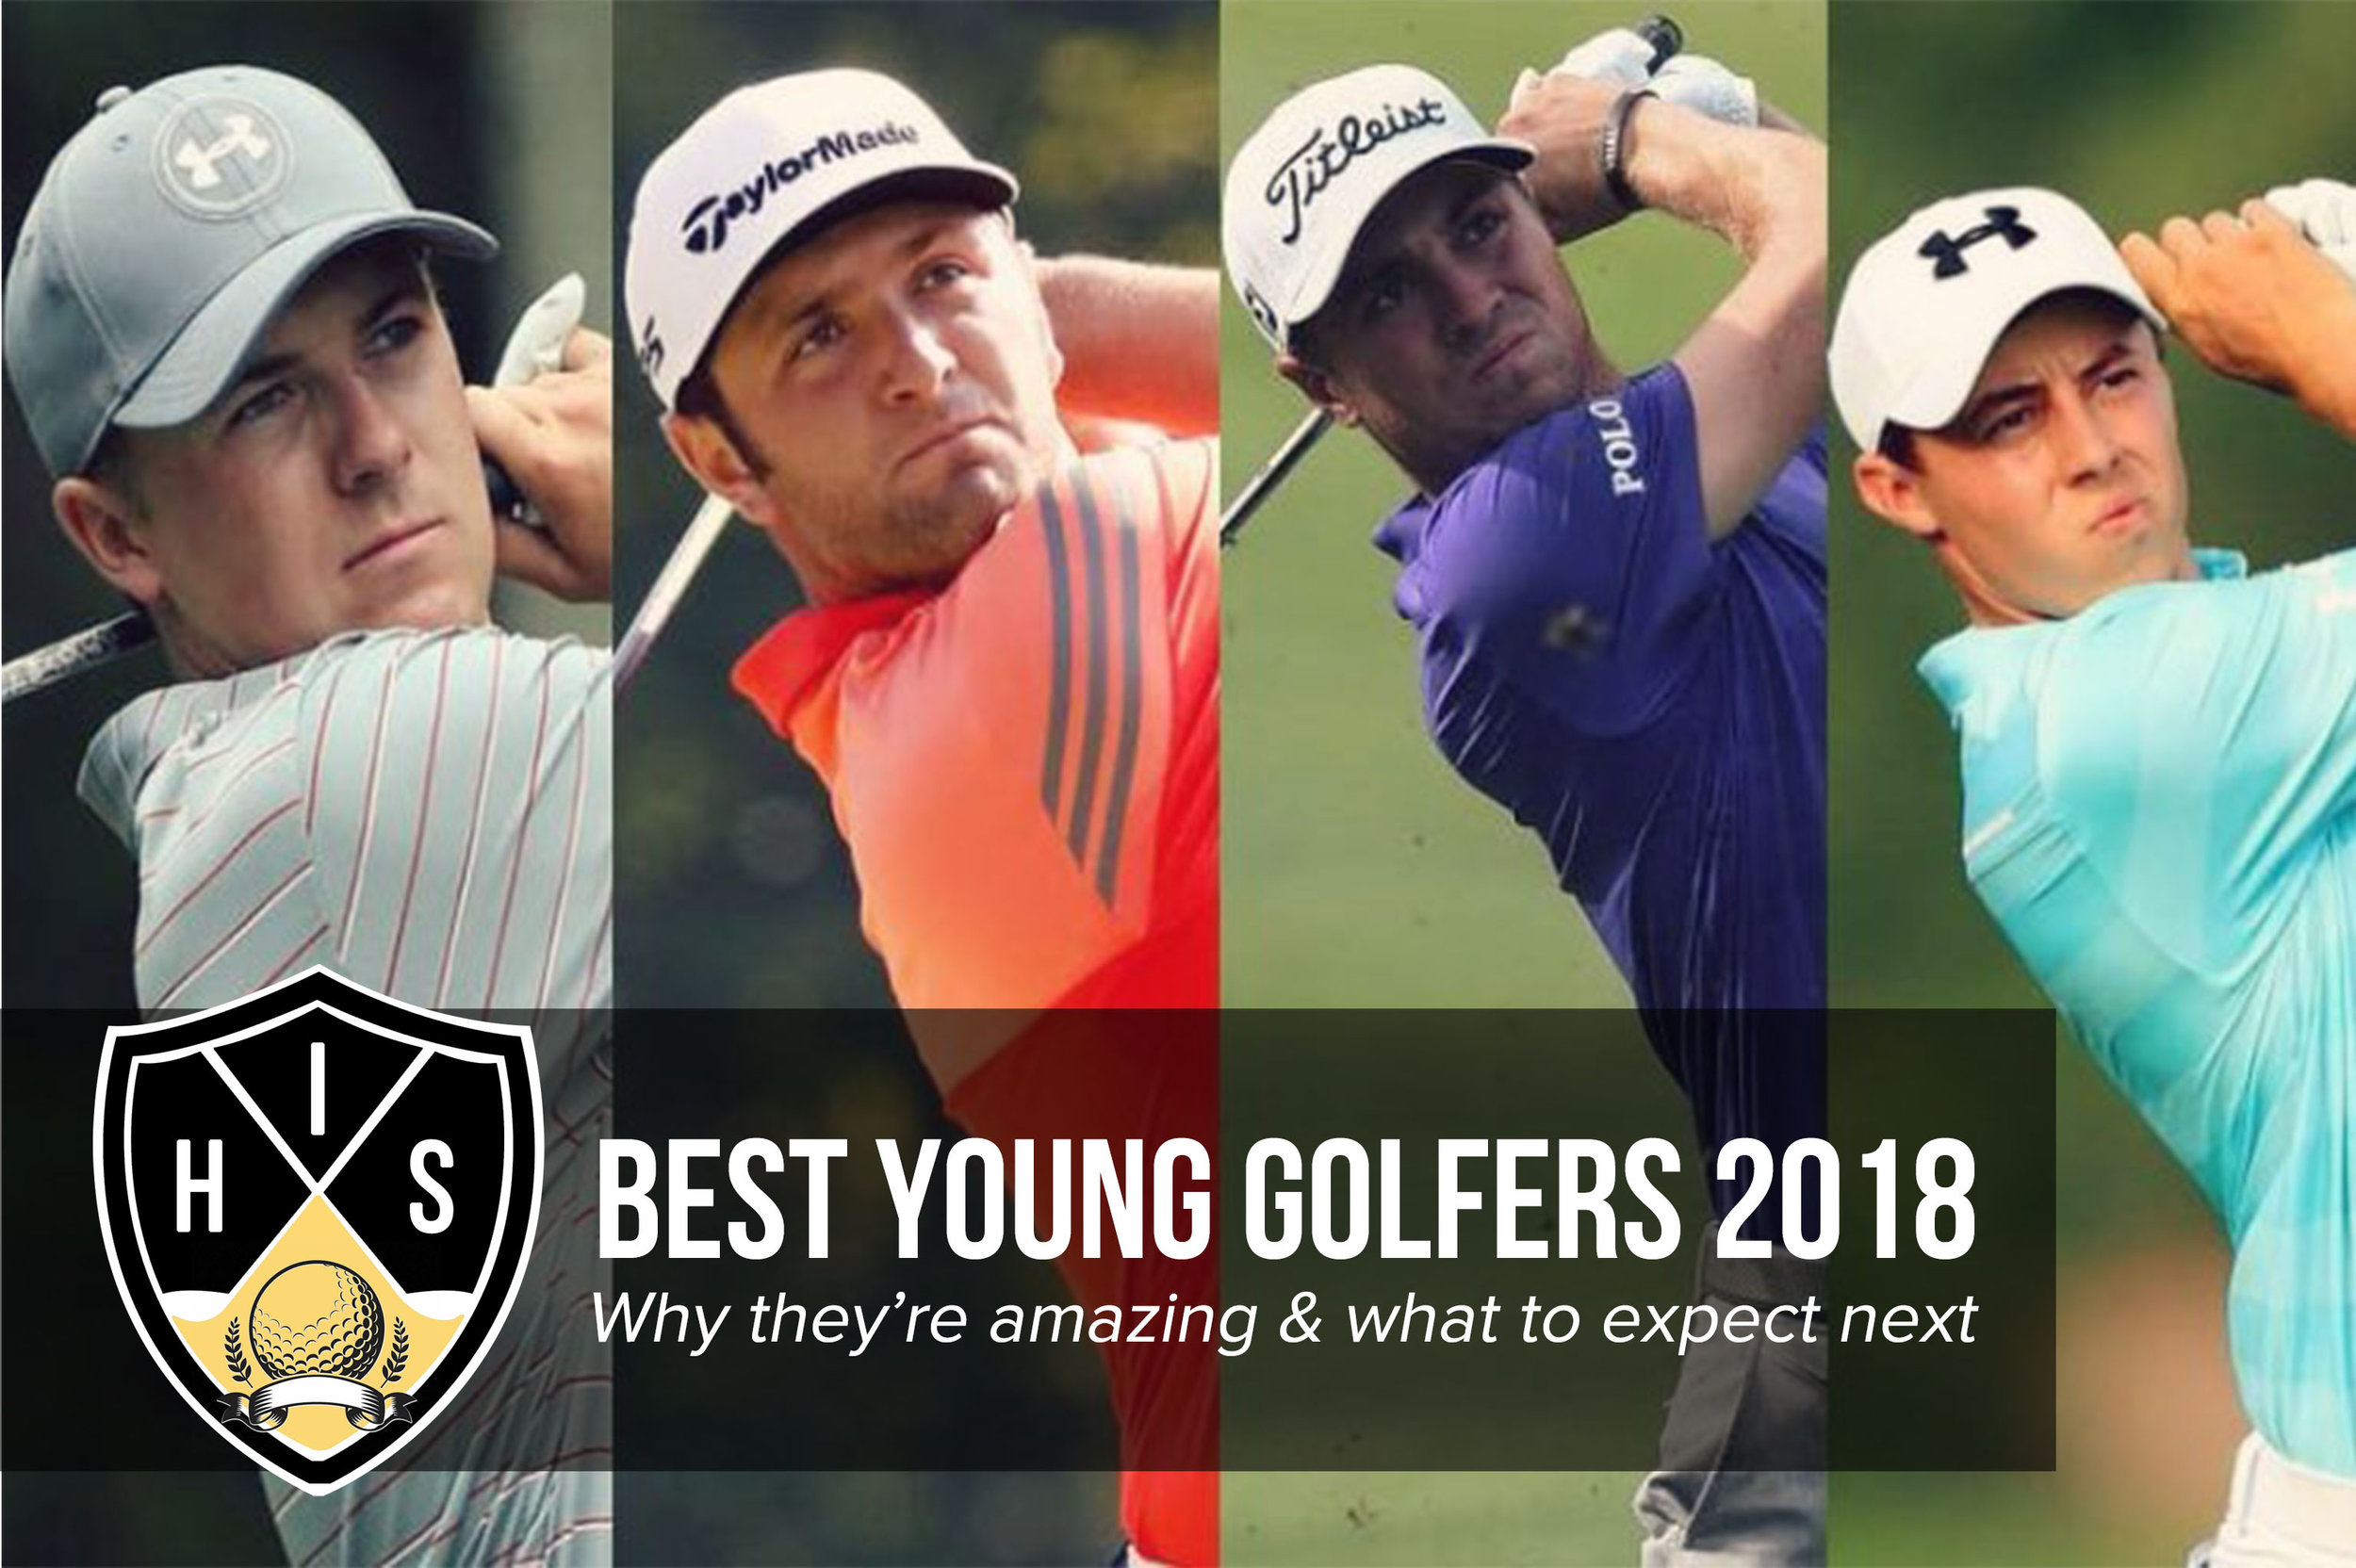 World Amateur Golf Rankings explained - The All Square Blog